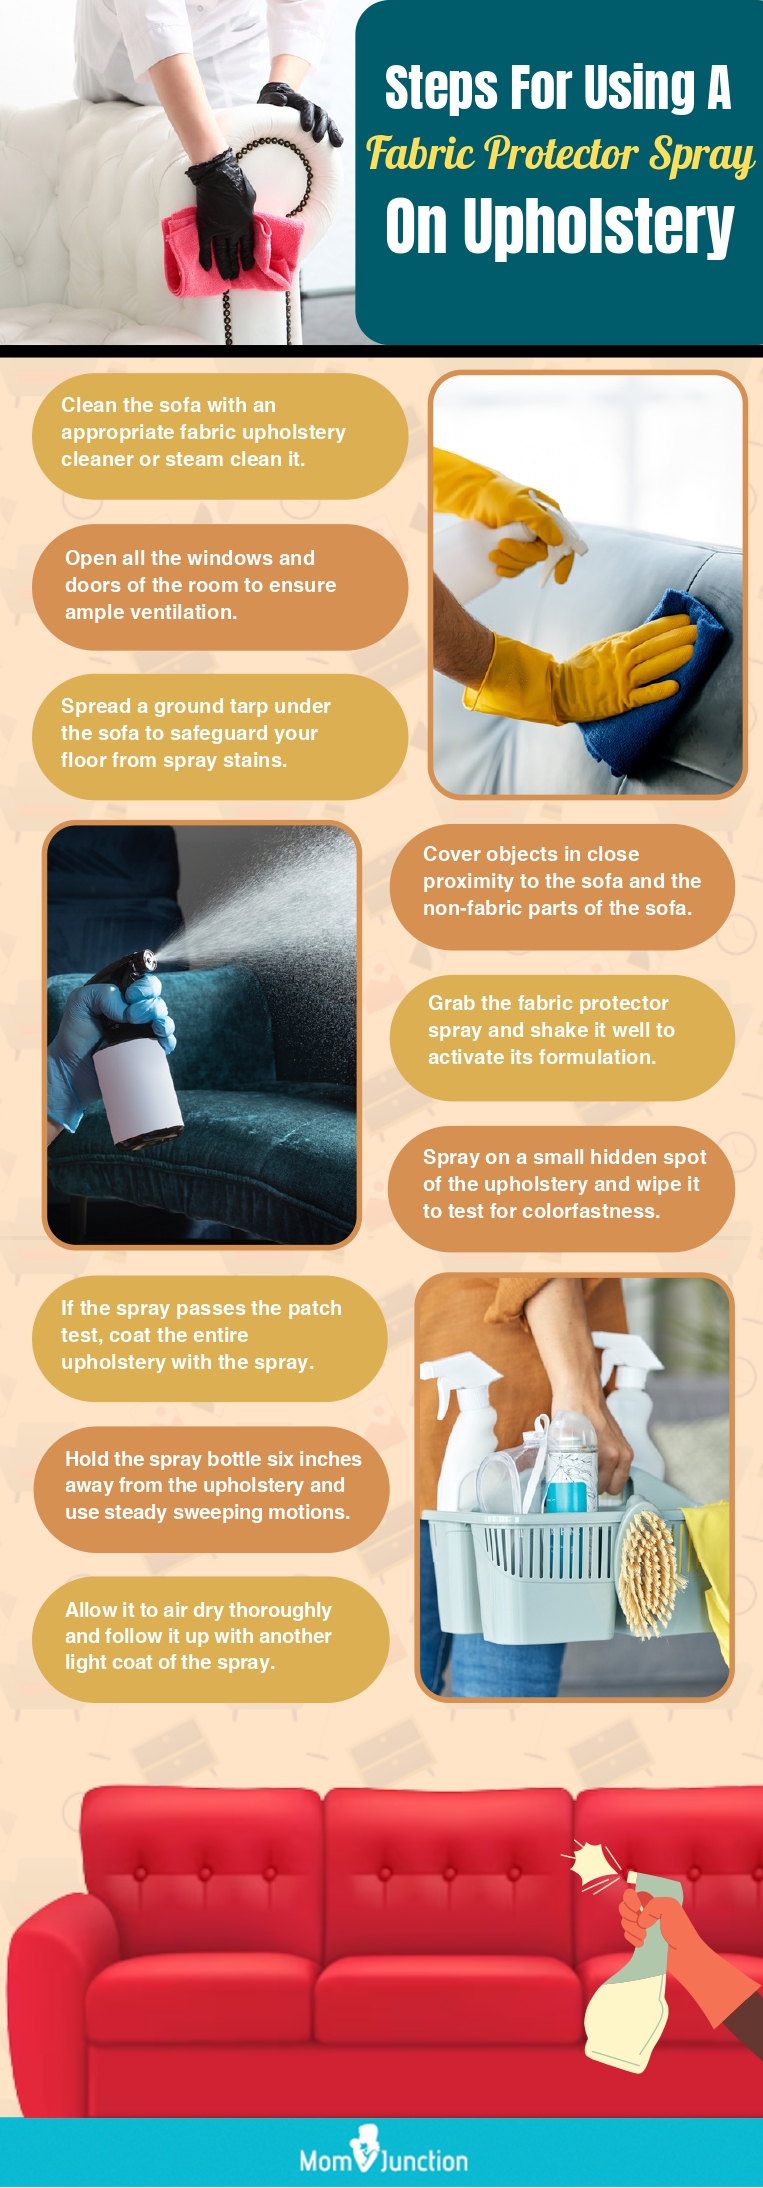 Steps For Using A Fabric Protector Spray On Upholstery (infographic)